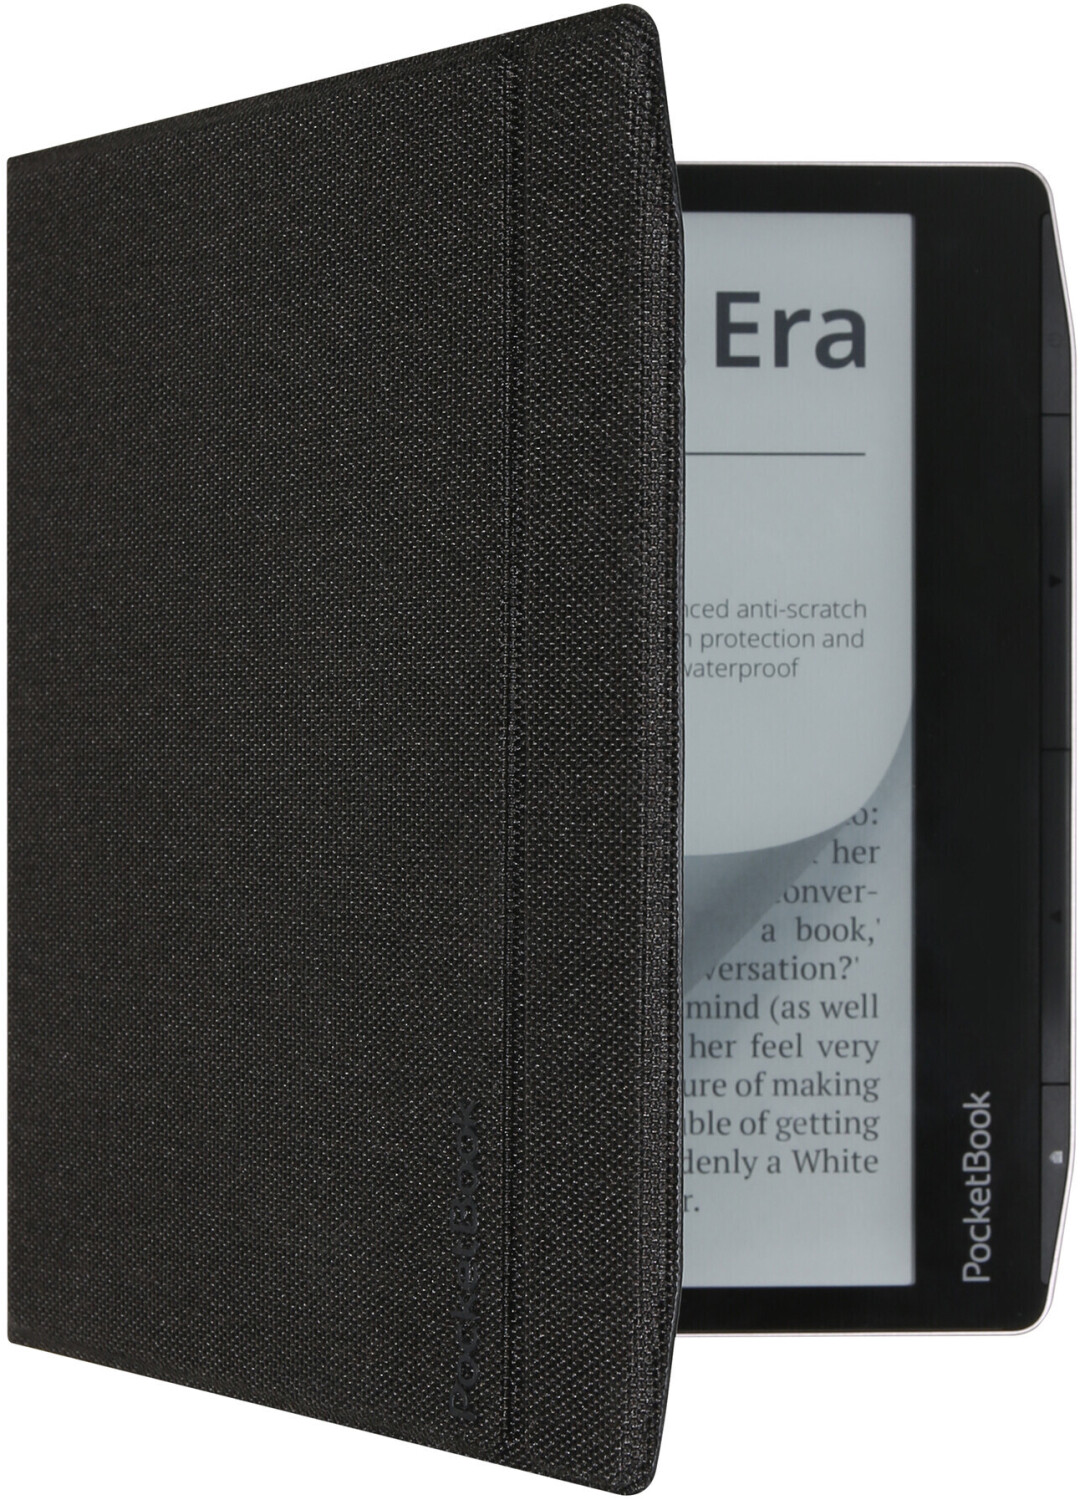 PocketBook Era Cover Charge desde 19,14 €